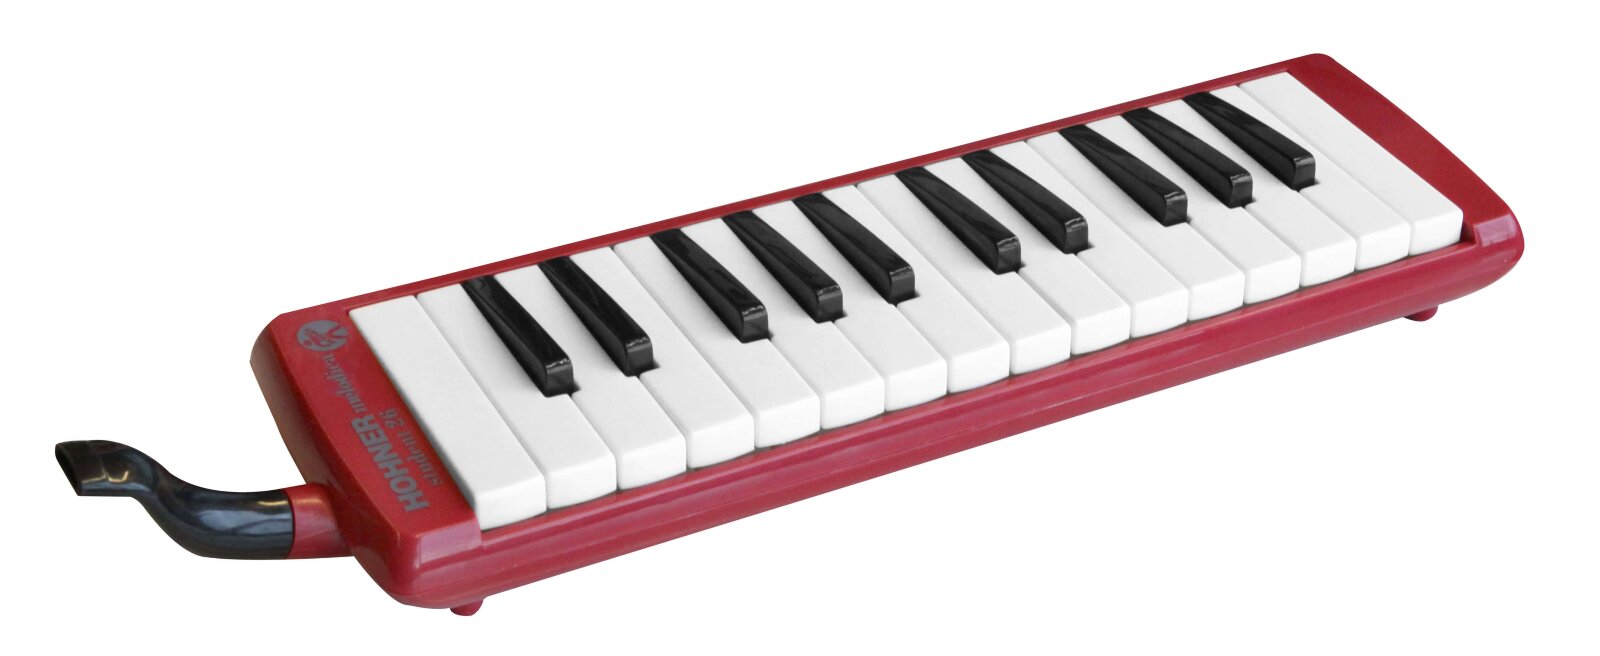 Hohner Melodica Student 26 B-C3 red : photo 1